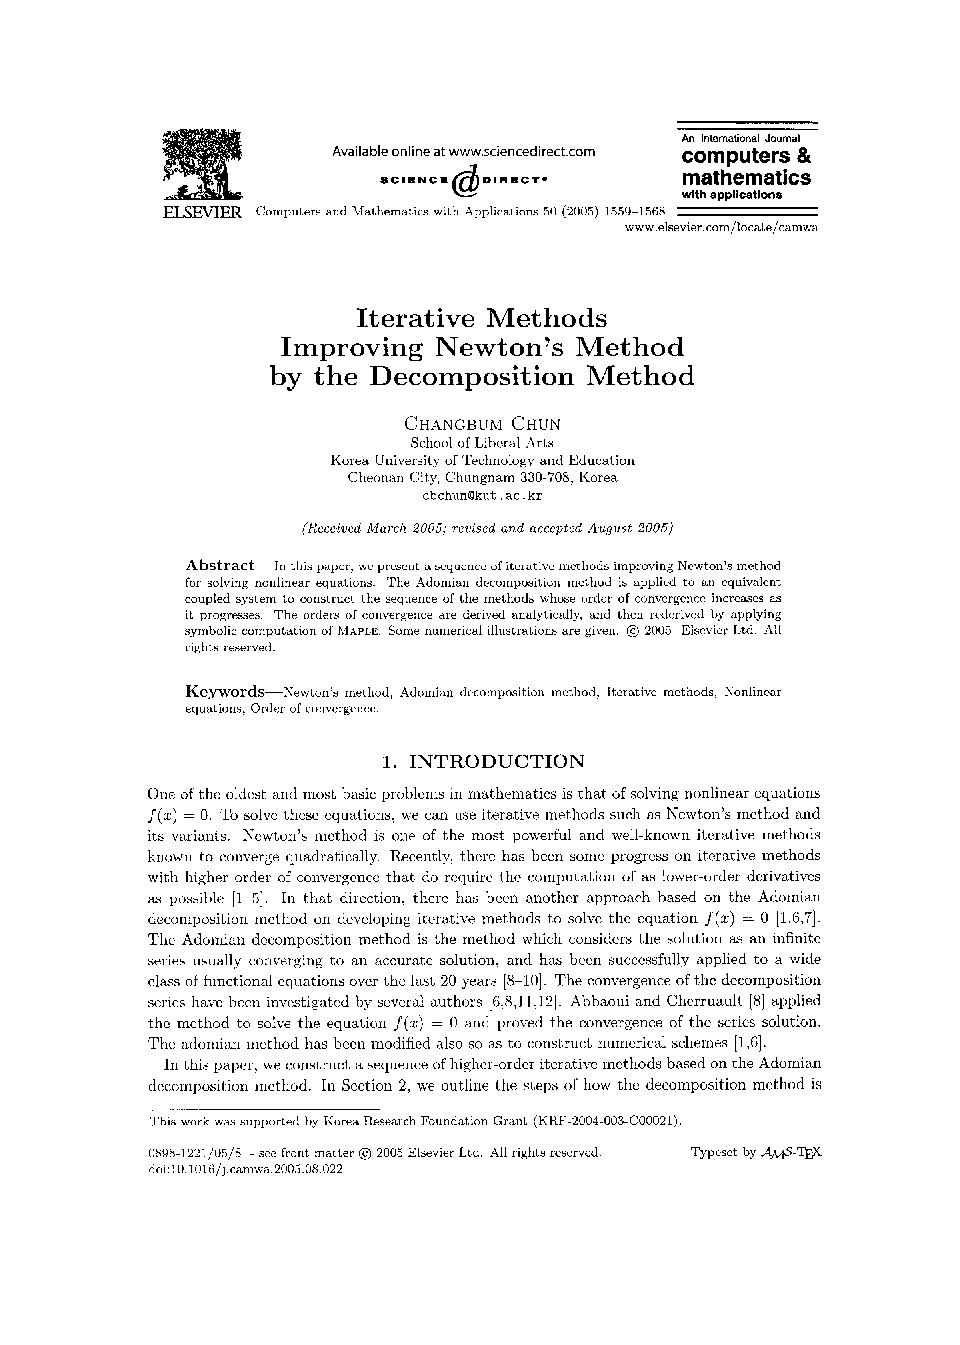 Iterative methods improving newton's method by the decomposition method